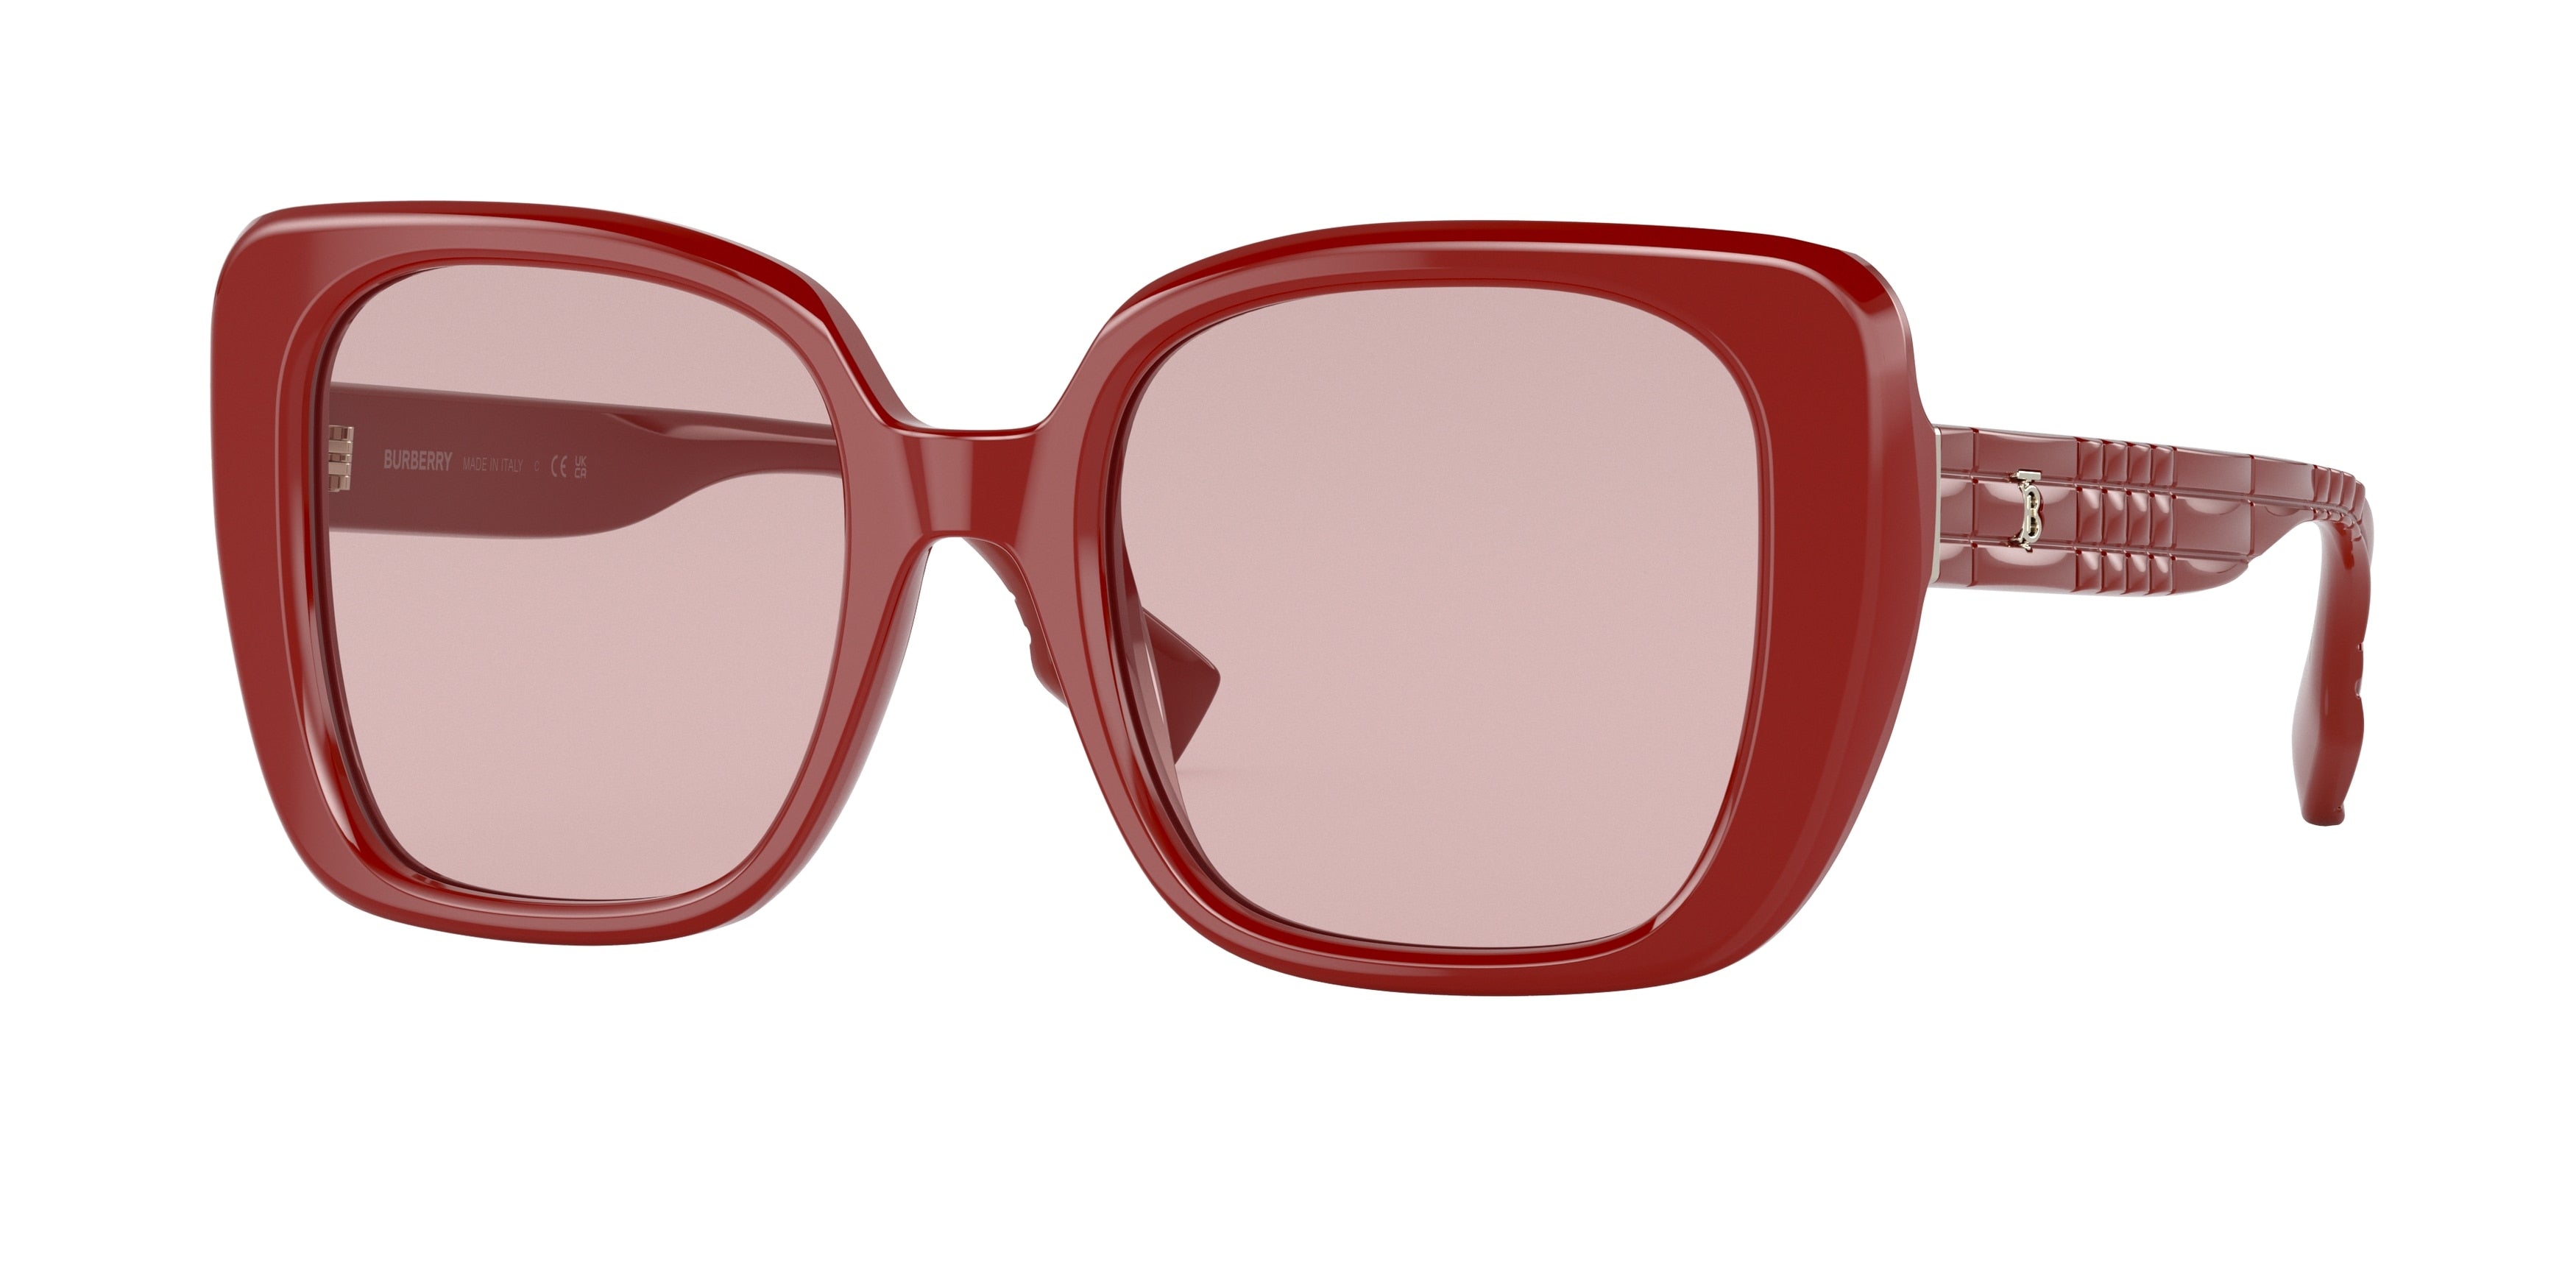 Burberry HELENA BE4371 Square Sunglasses  4027/5-Red 52-140-20 - Color Map Red